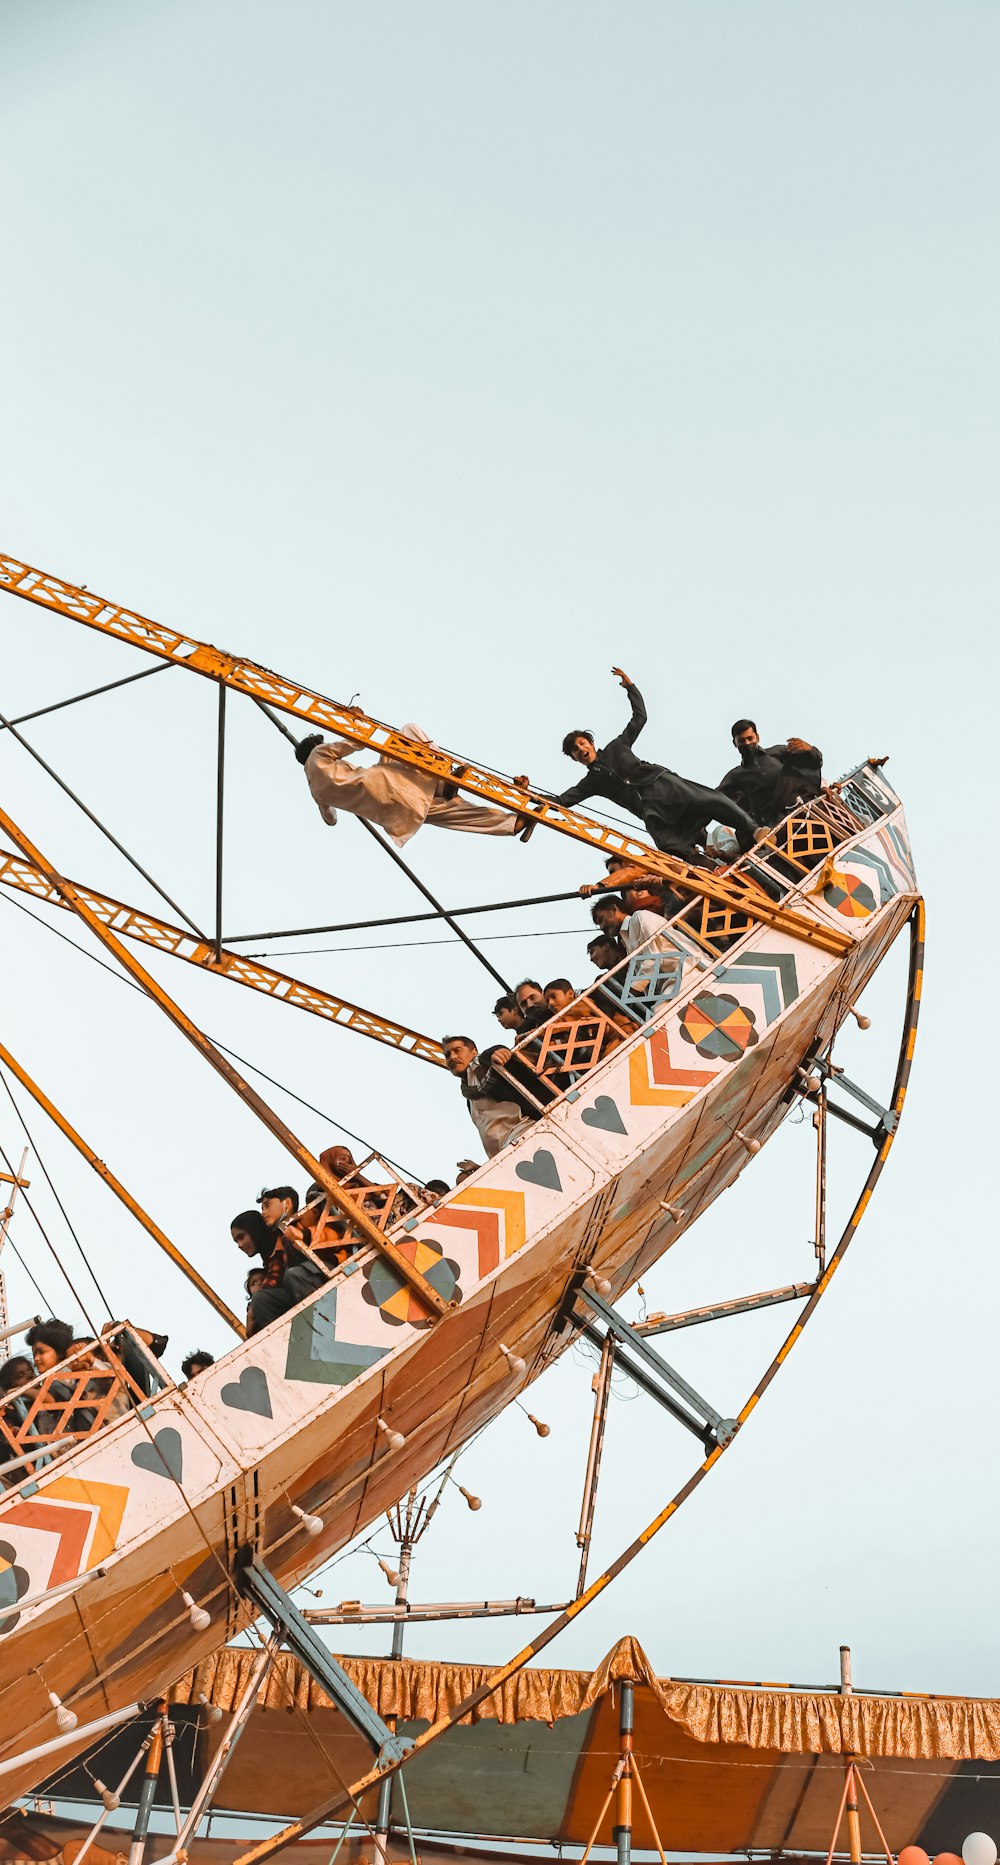 people riding on roller coaster during daytime